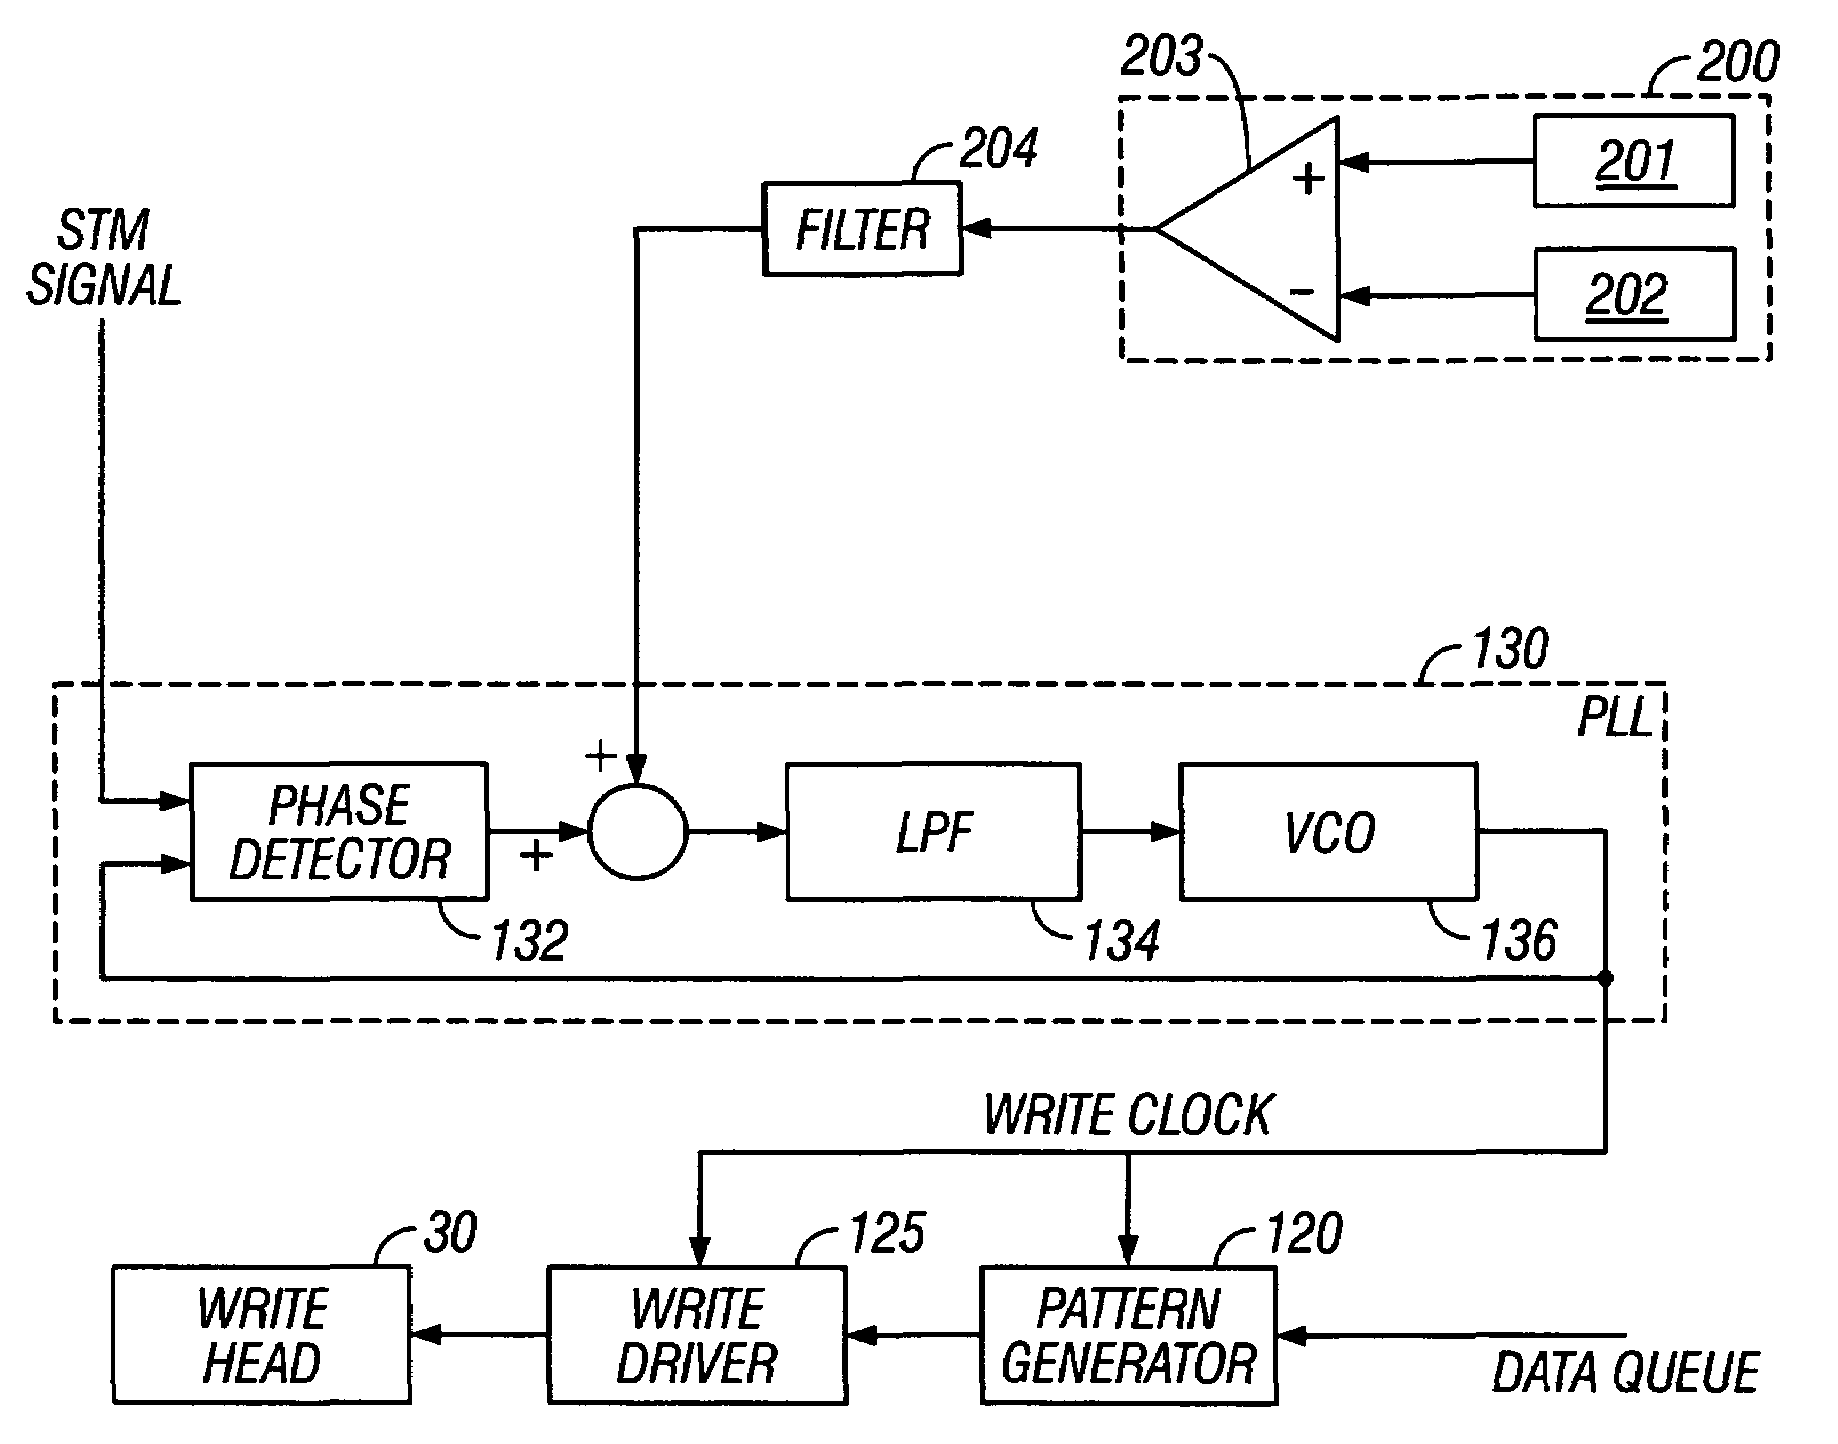 Magnetic recording disk drive with patterned media and compensation for write-clock timing error caused by rotational disturbances